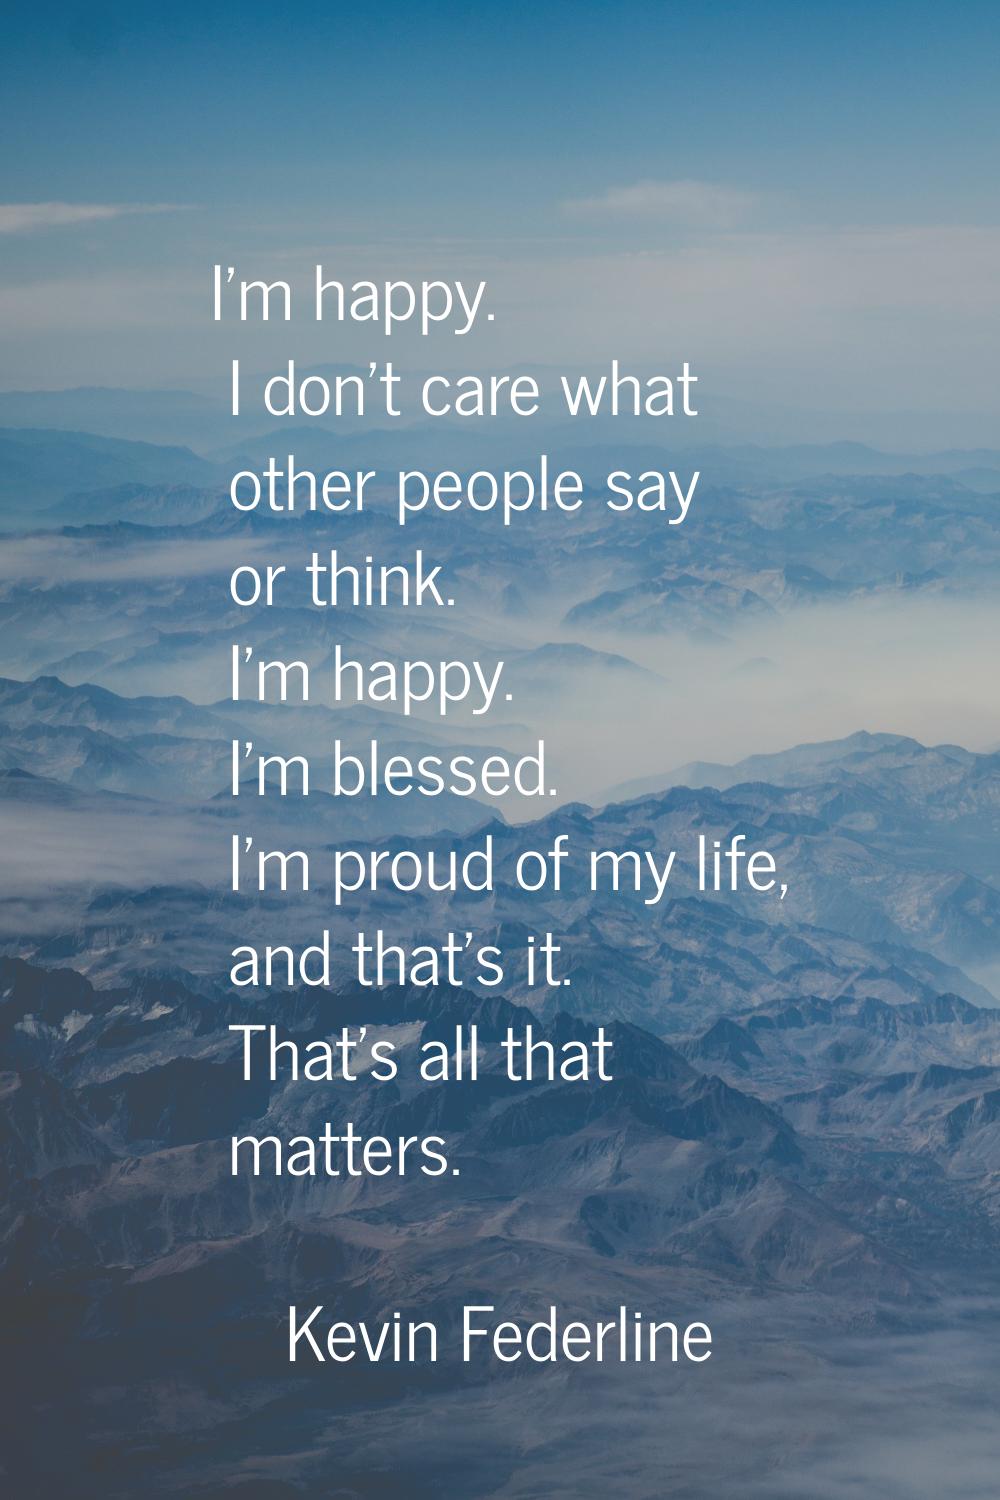 I'm happy. I don't care what other people say or think. I'm happy. I'm blessed. I'm proud of my lif